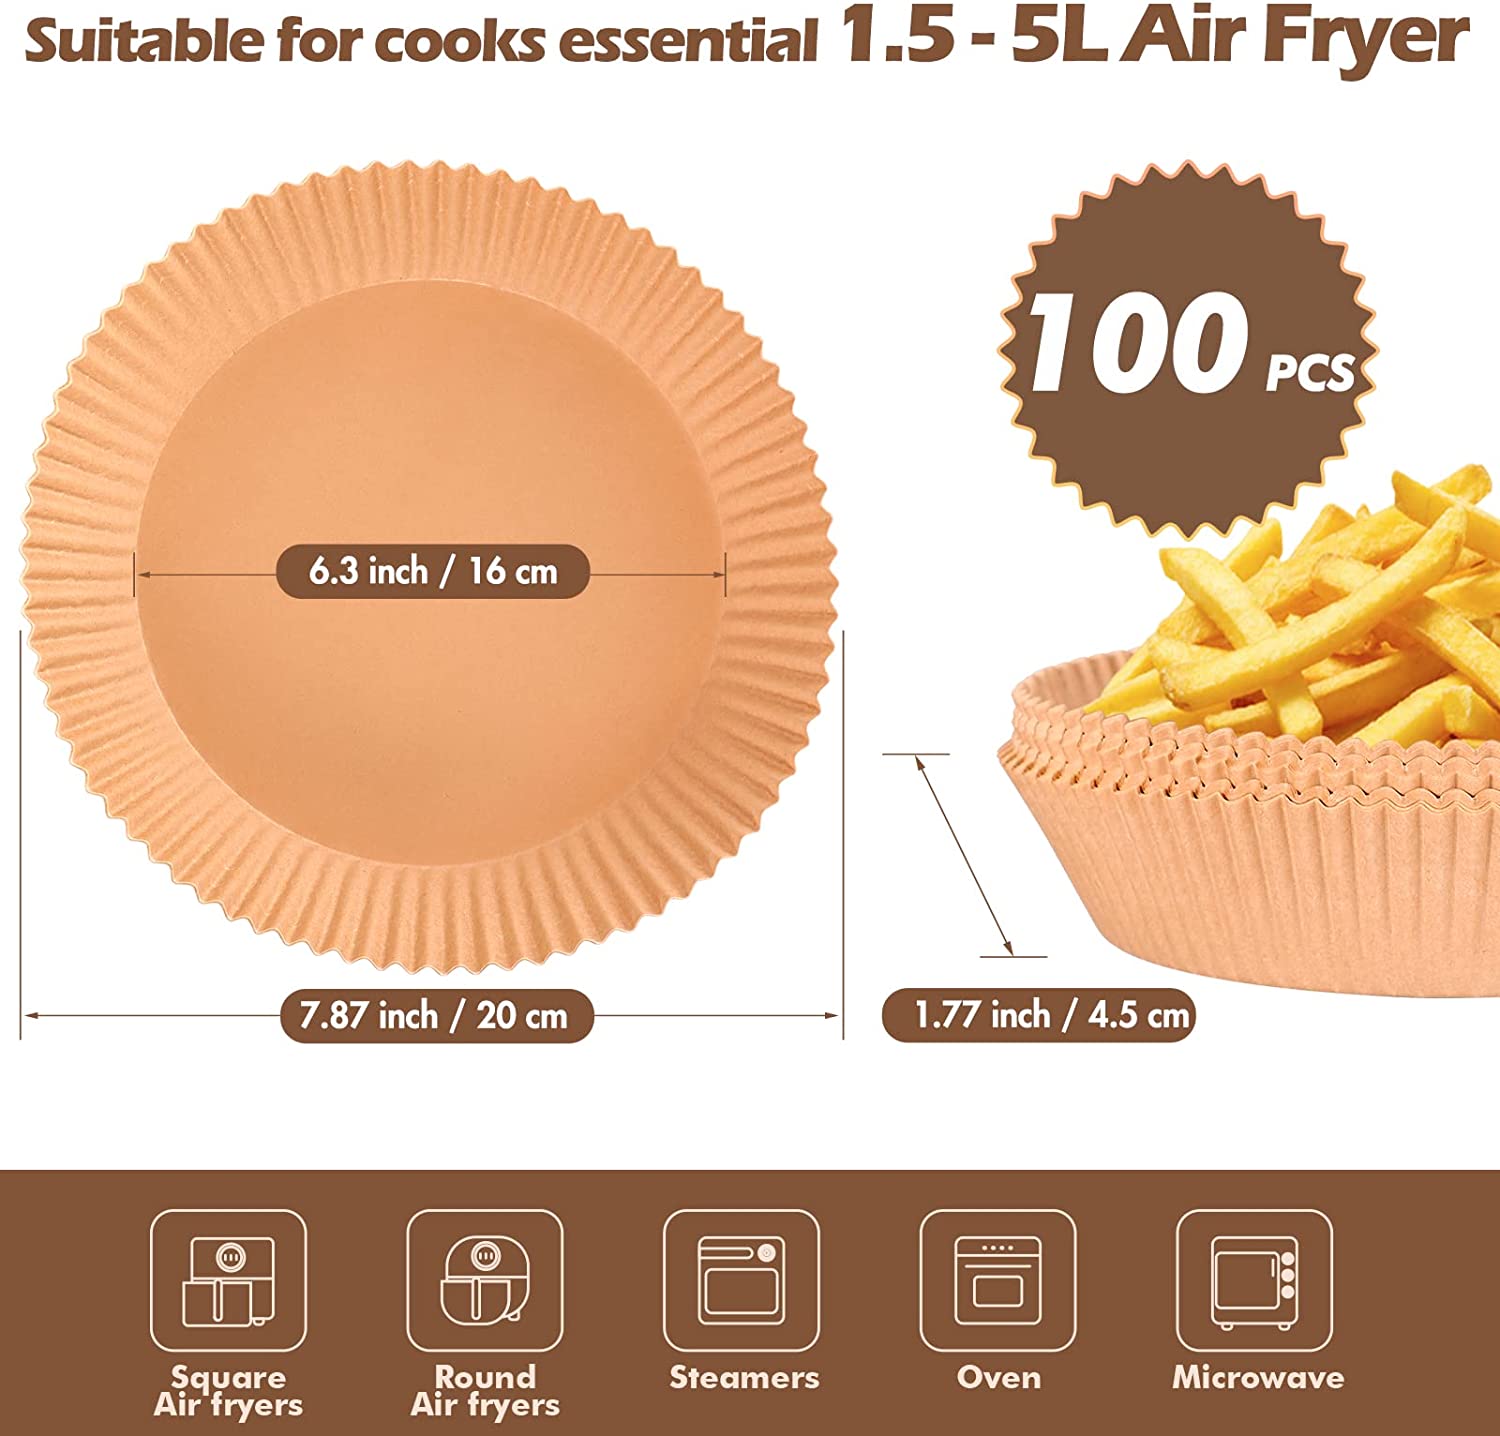 https://webakemall.com/cdn/shop/products/Webake_Air_Fryer_Liners_6.3_Inch_Disposable_Paper_Liner_100pcs_Parchment_Paper_Oil-proof_Water-proof_Non-stick_Round_Small_Air_fryer_Basket_Filters_Liners_for_Baking_Roasting_Cookin.jpg?v=1658906752&width=1946